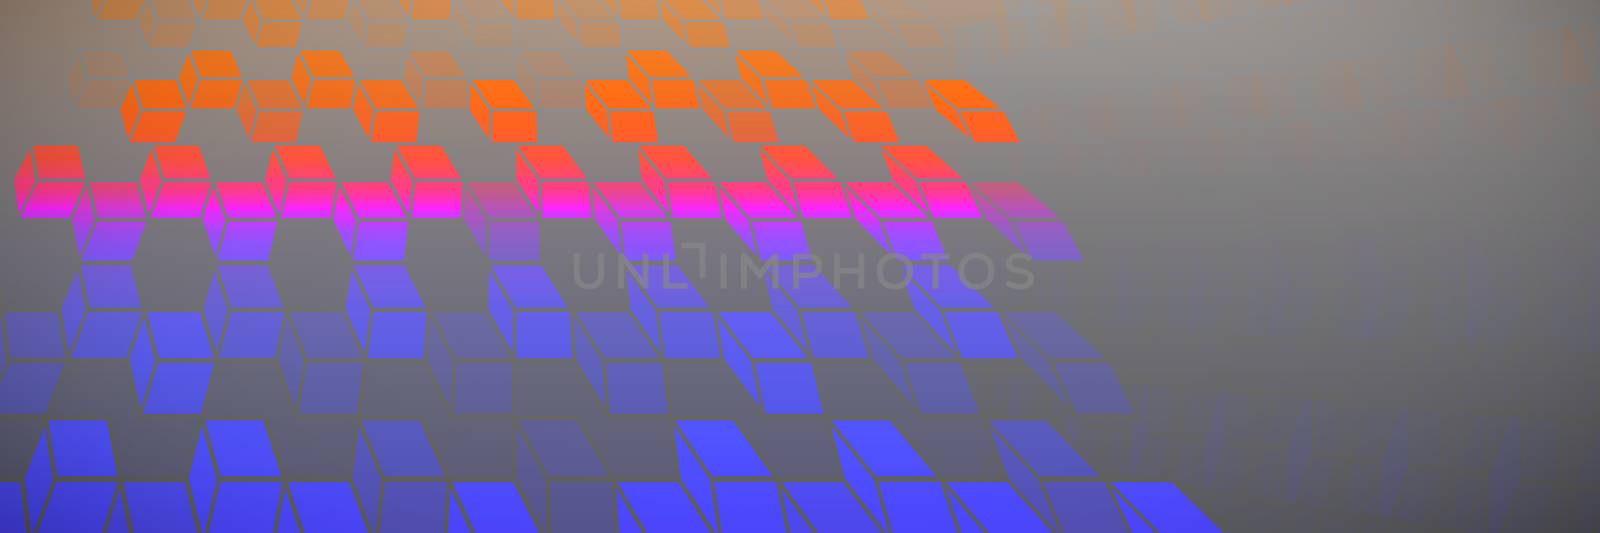 Composite image of colorful geometric squares  by Wavebreakmedia